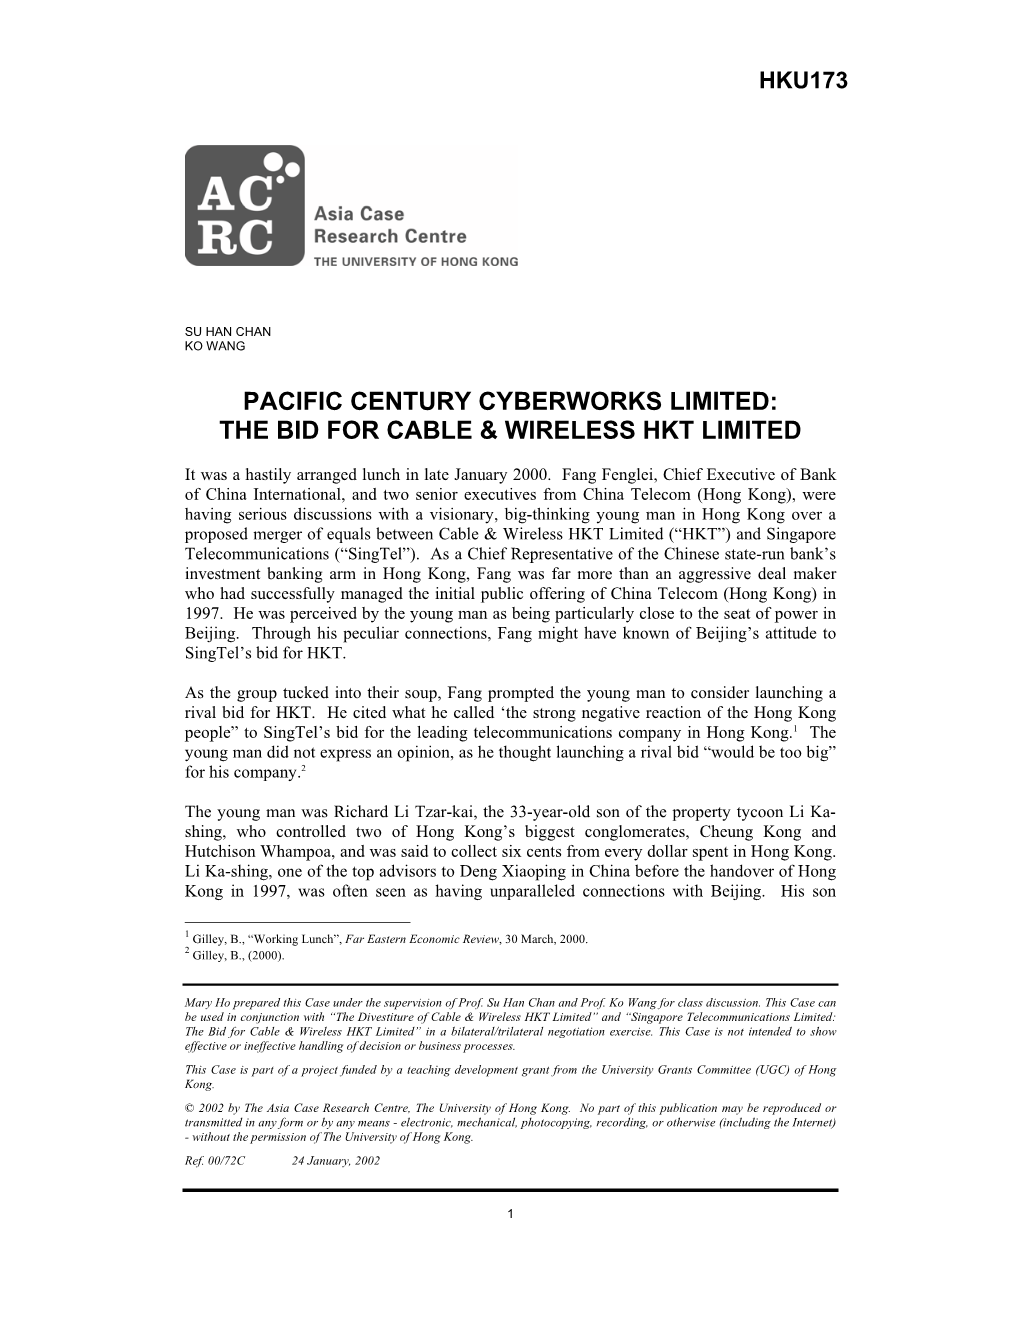 Pacific Century Cyberworks Limited: the Bid for Cable & Wireless Hkt Limited